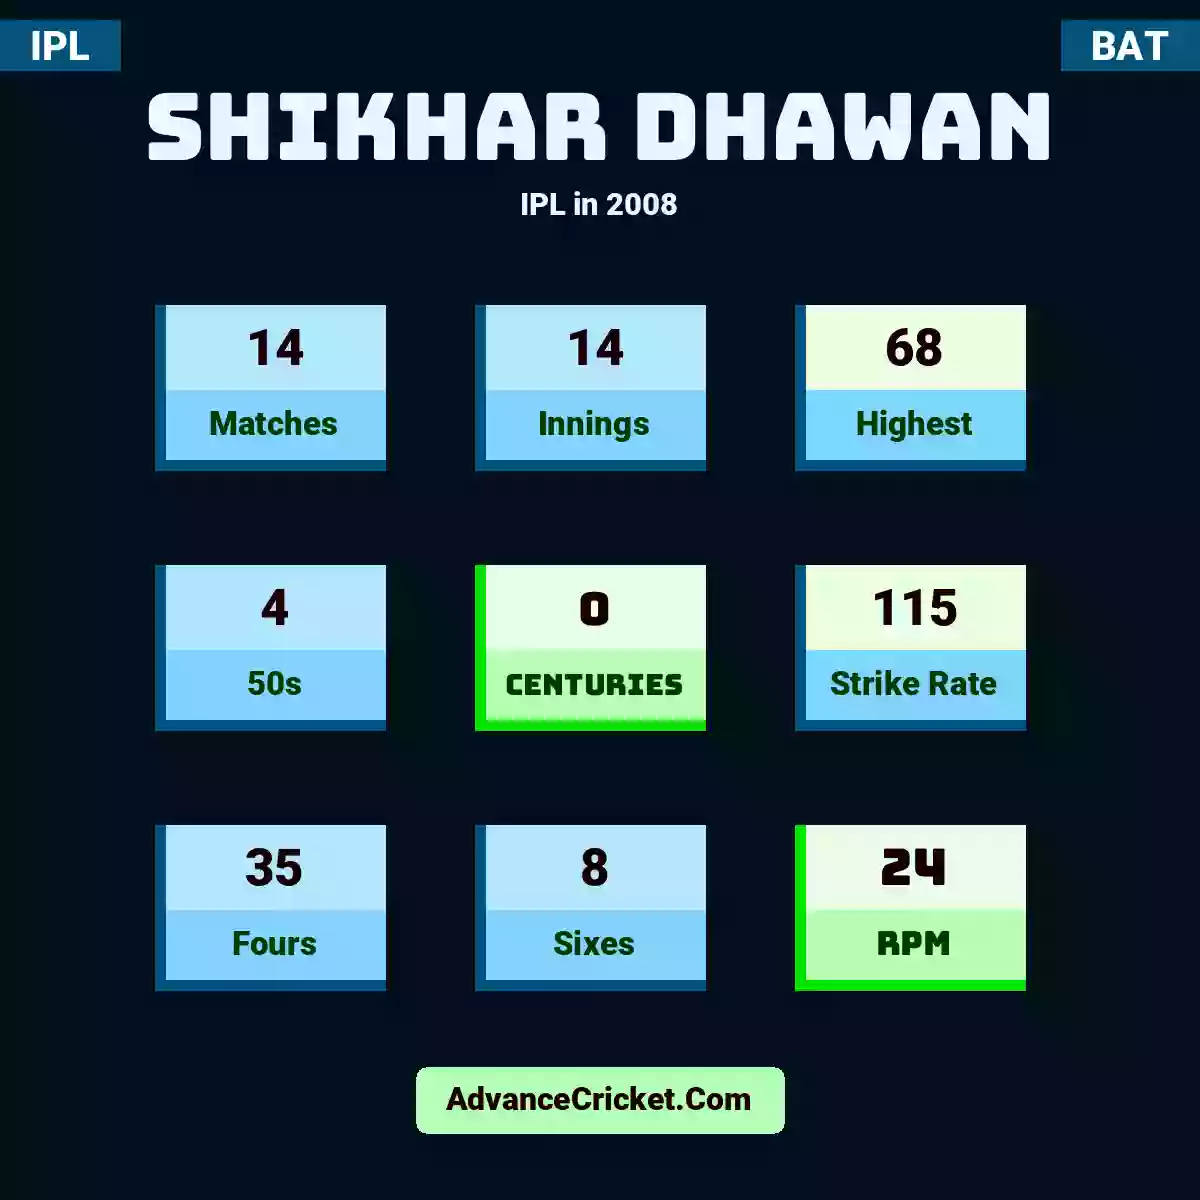 Shikhar Dhawan IPL  in 2008, Shikhar Dhawan played 14 matches, scored 68 runs as highest, 4 half-centuries, and 0 centuries, with a strike rate of 115. S.Dhawan hit 35 fours and 8 sixes, with an RPM of 24.